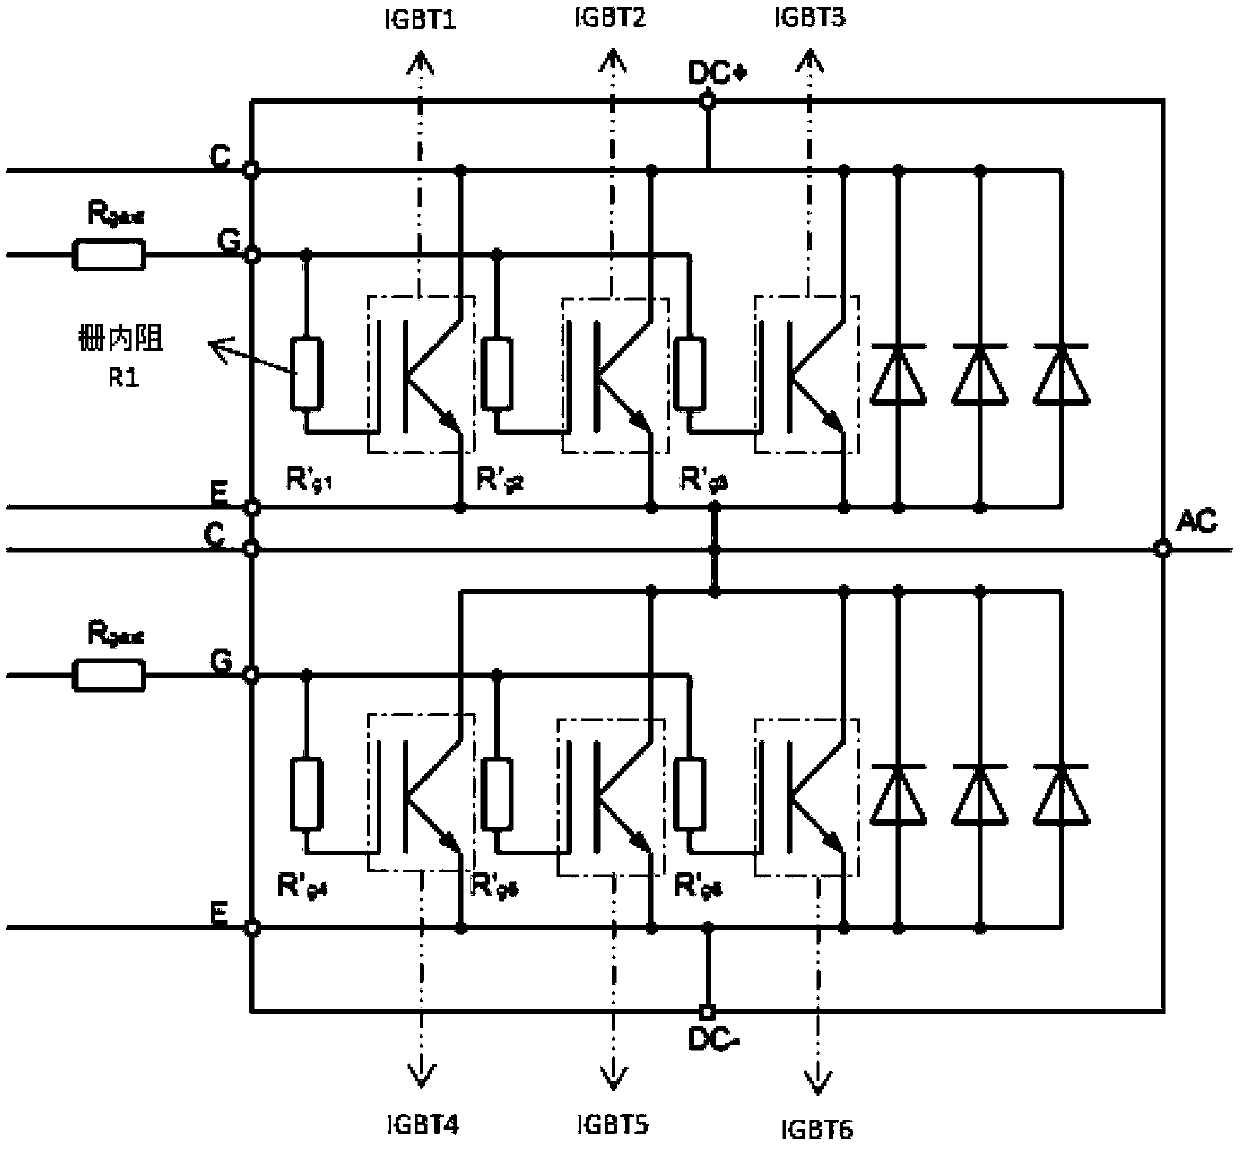 A kind of igbt chip variable gate internal resistance and its design method